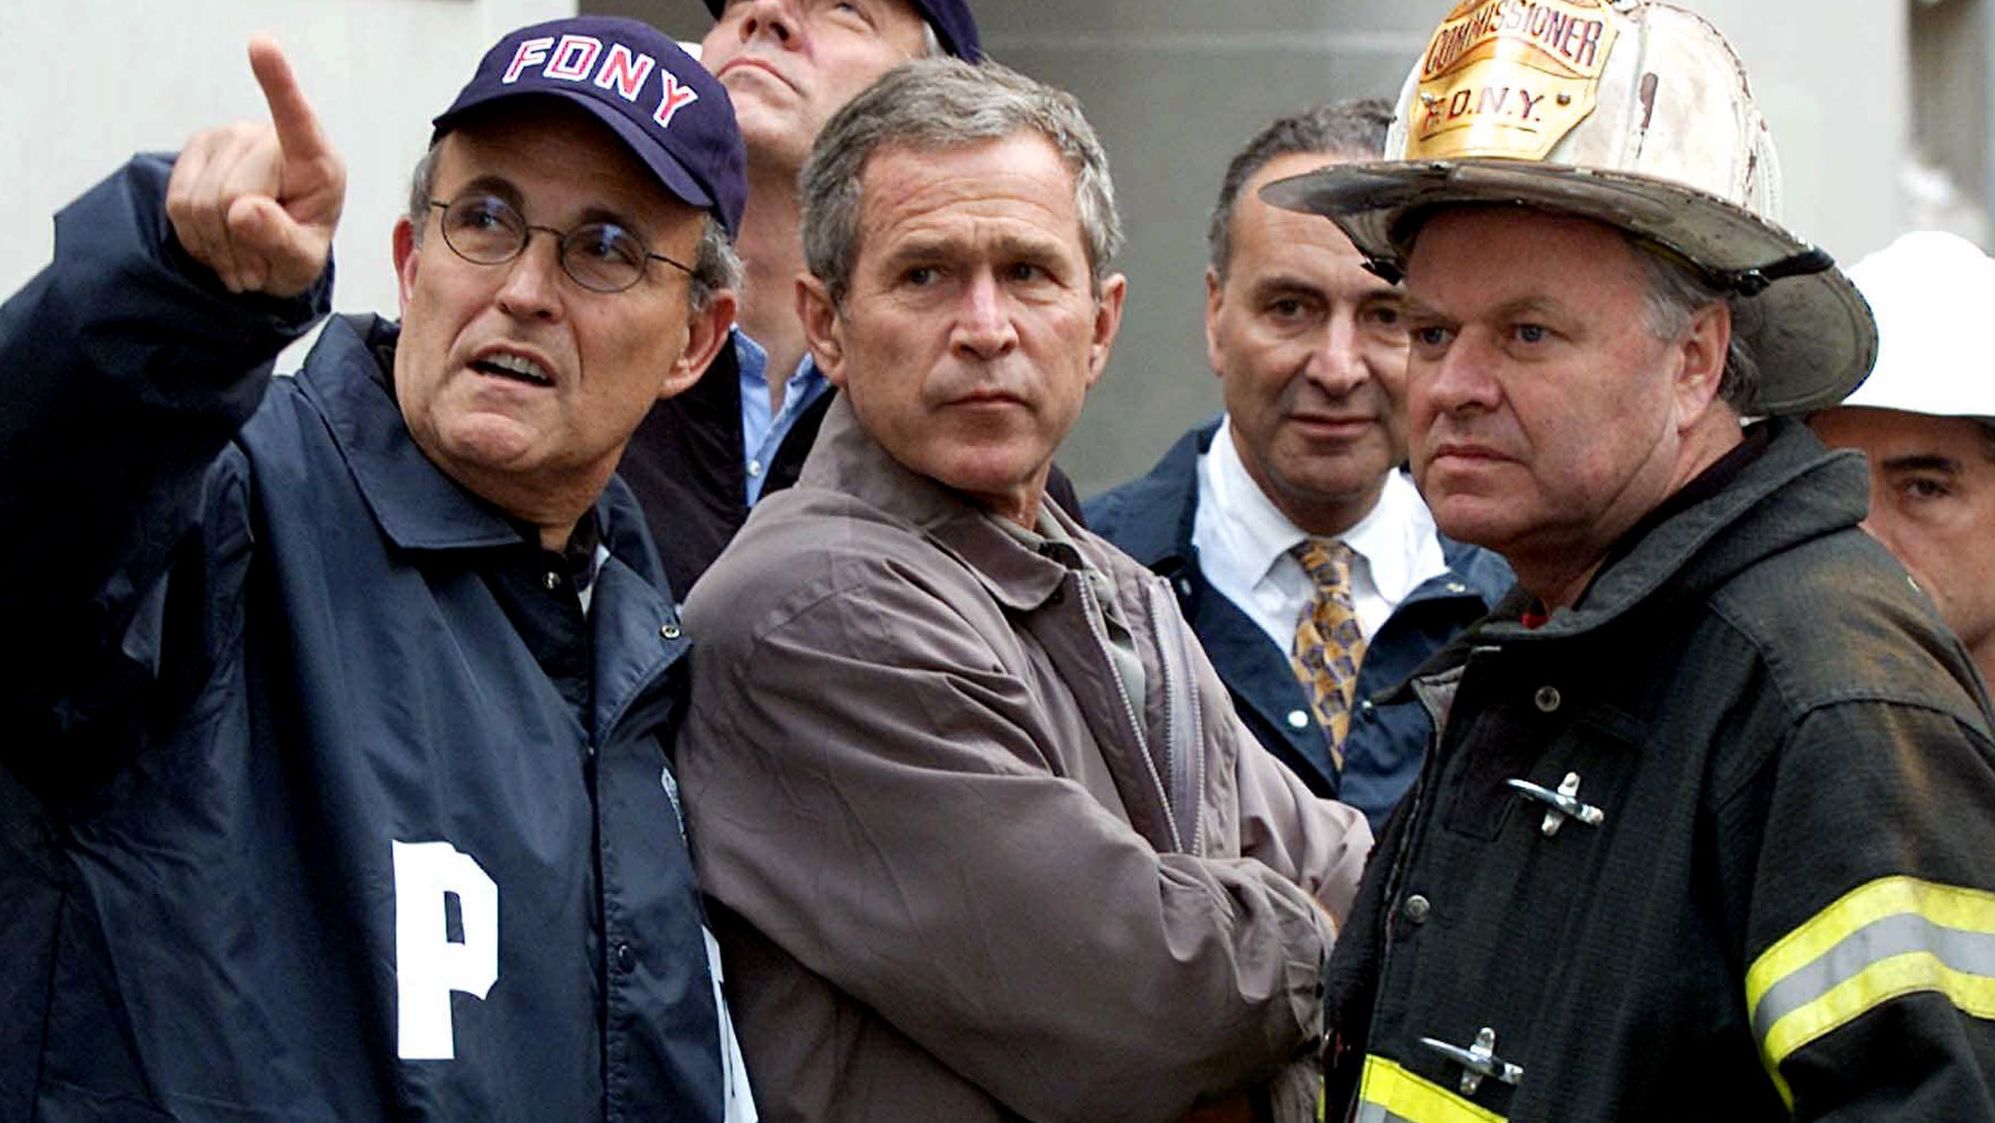 Giuliani, left, accompanies US President George W. Bush and other officials during a tour of the fallen World Trade Center in September 2001.